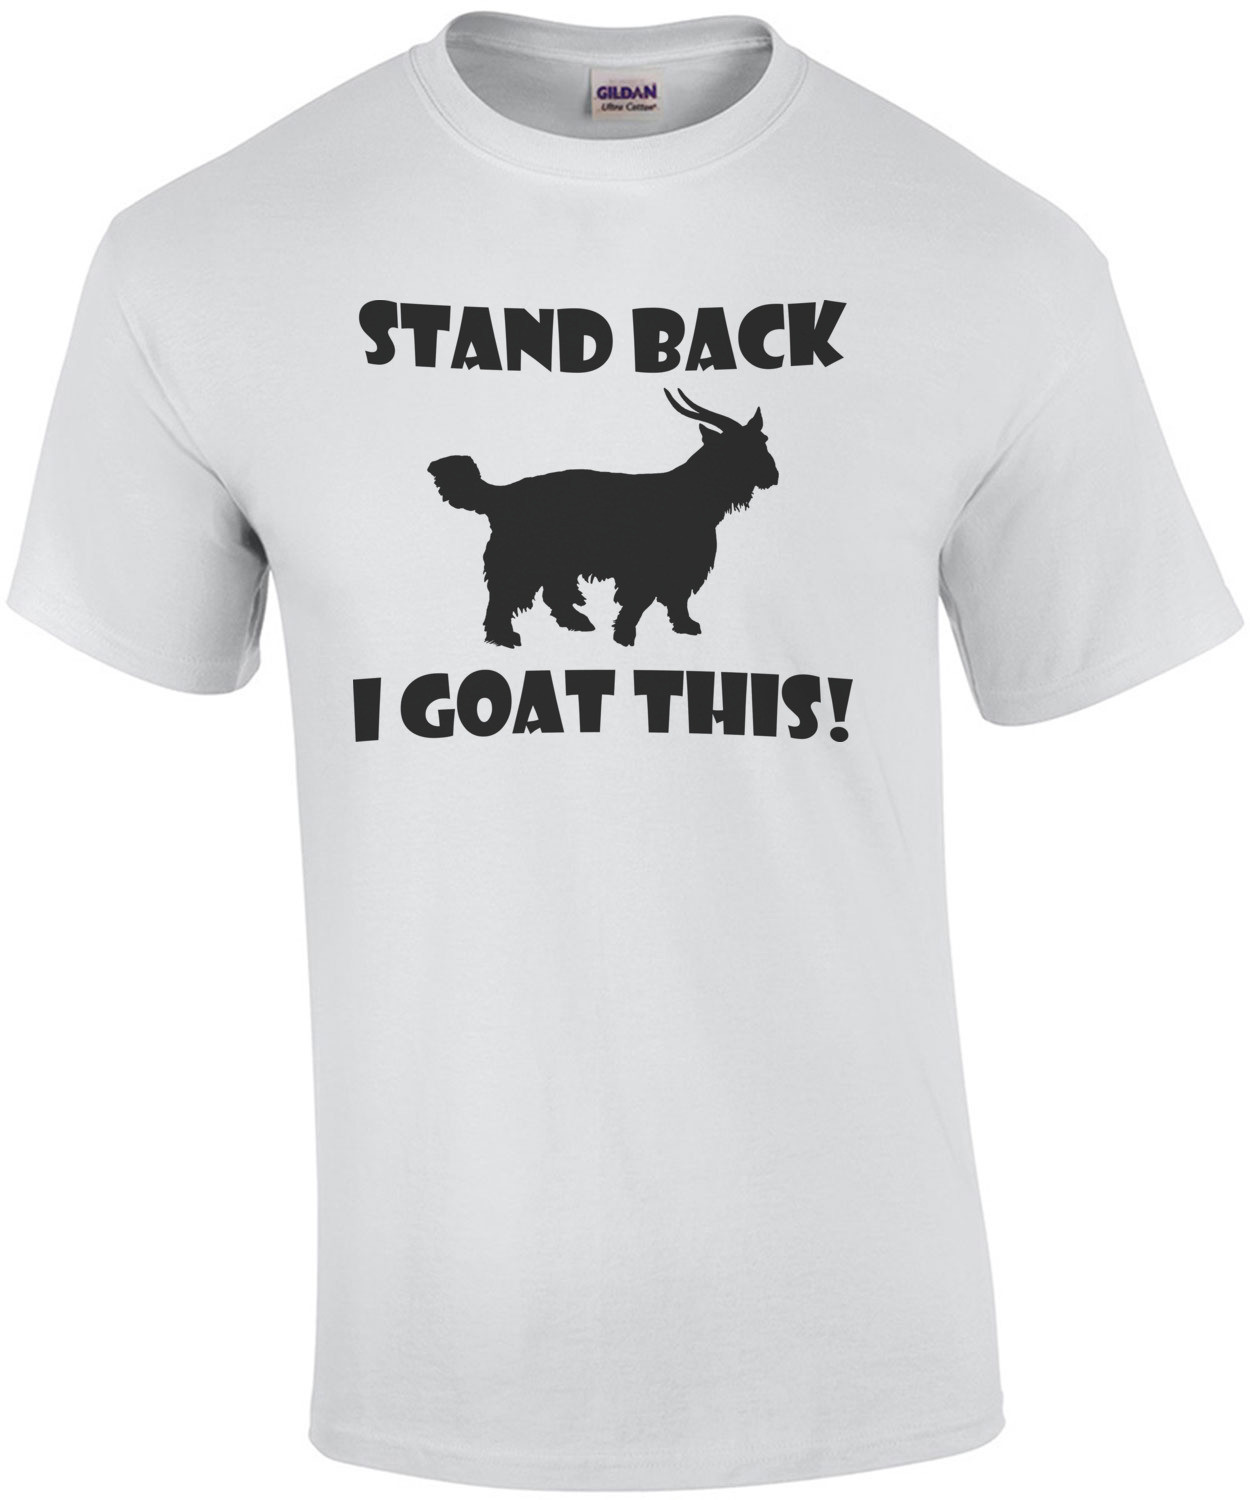 Stand Back I Goat This Shirt